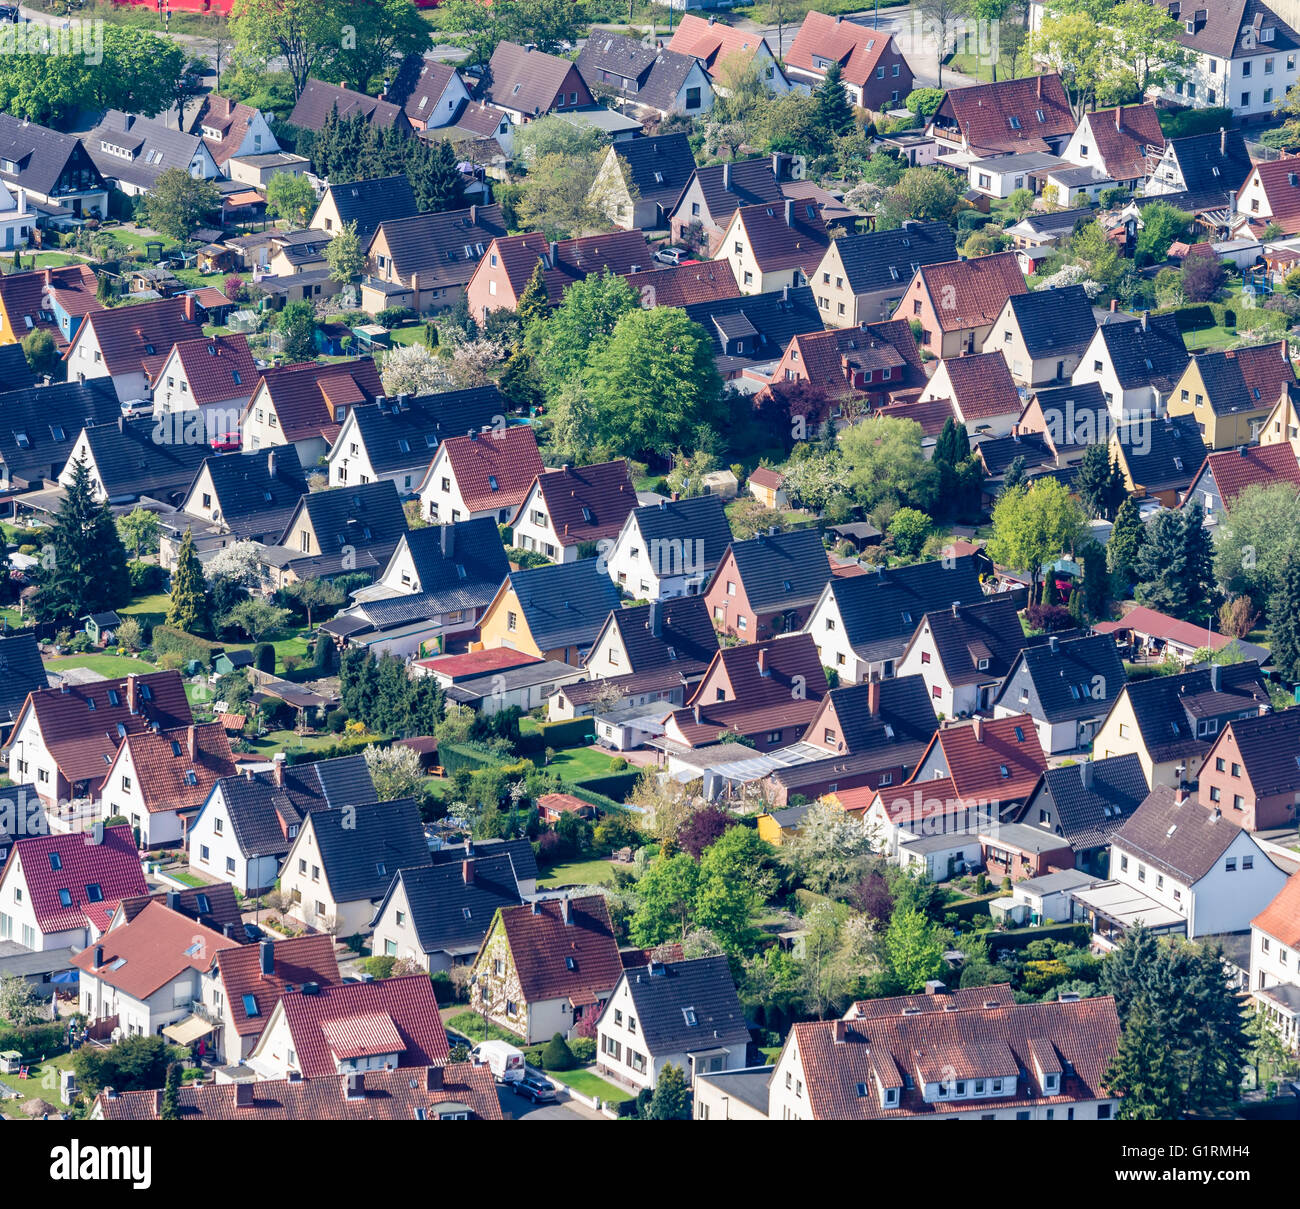 Housing area, town of Celle, Lower Saxony, Germany Stock Photo